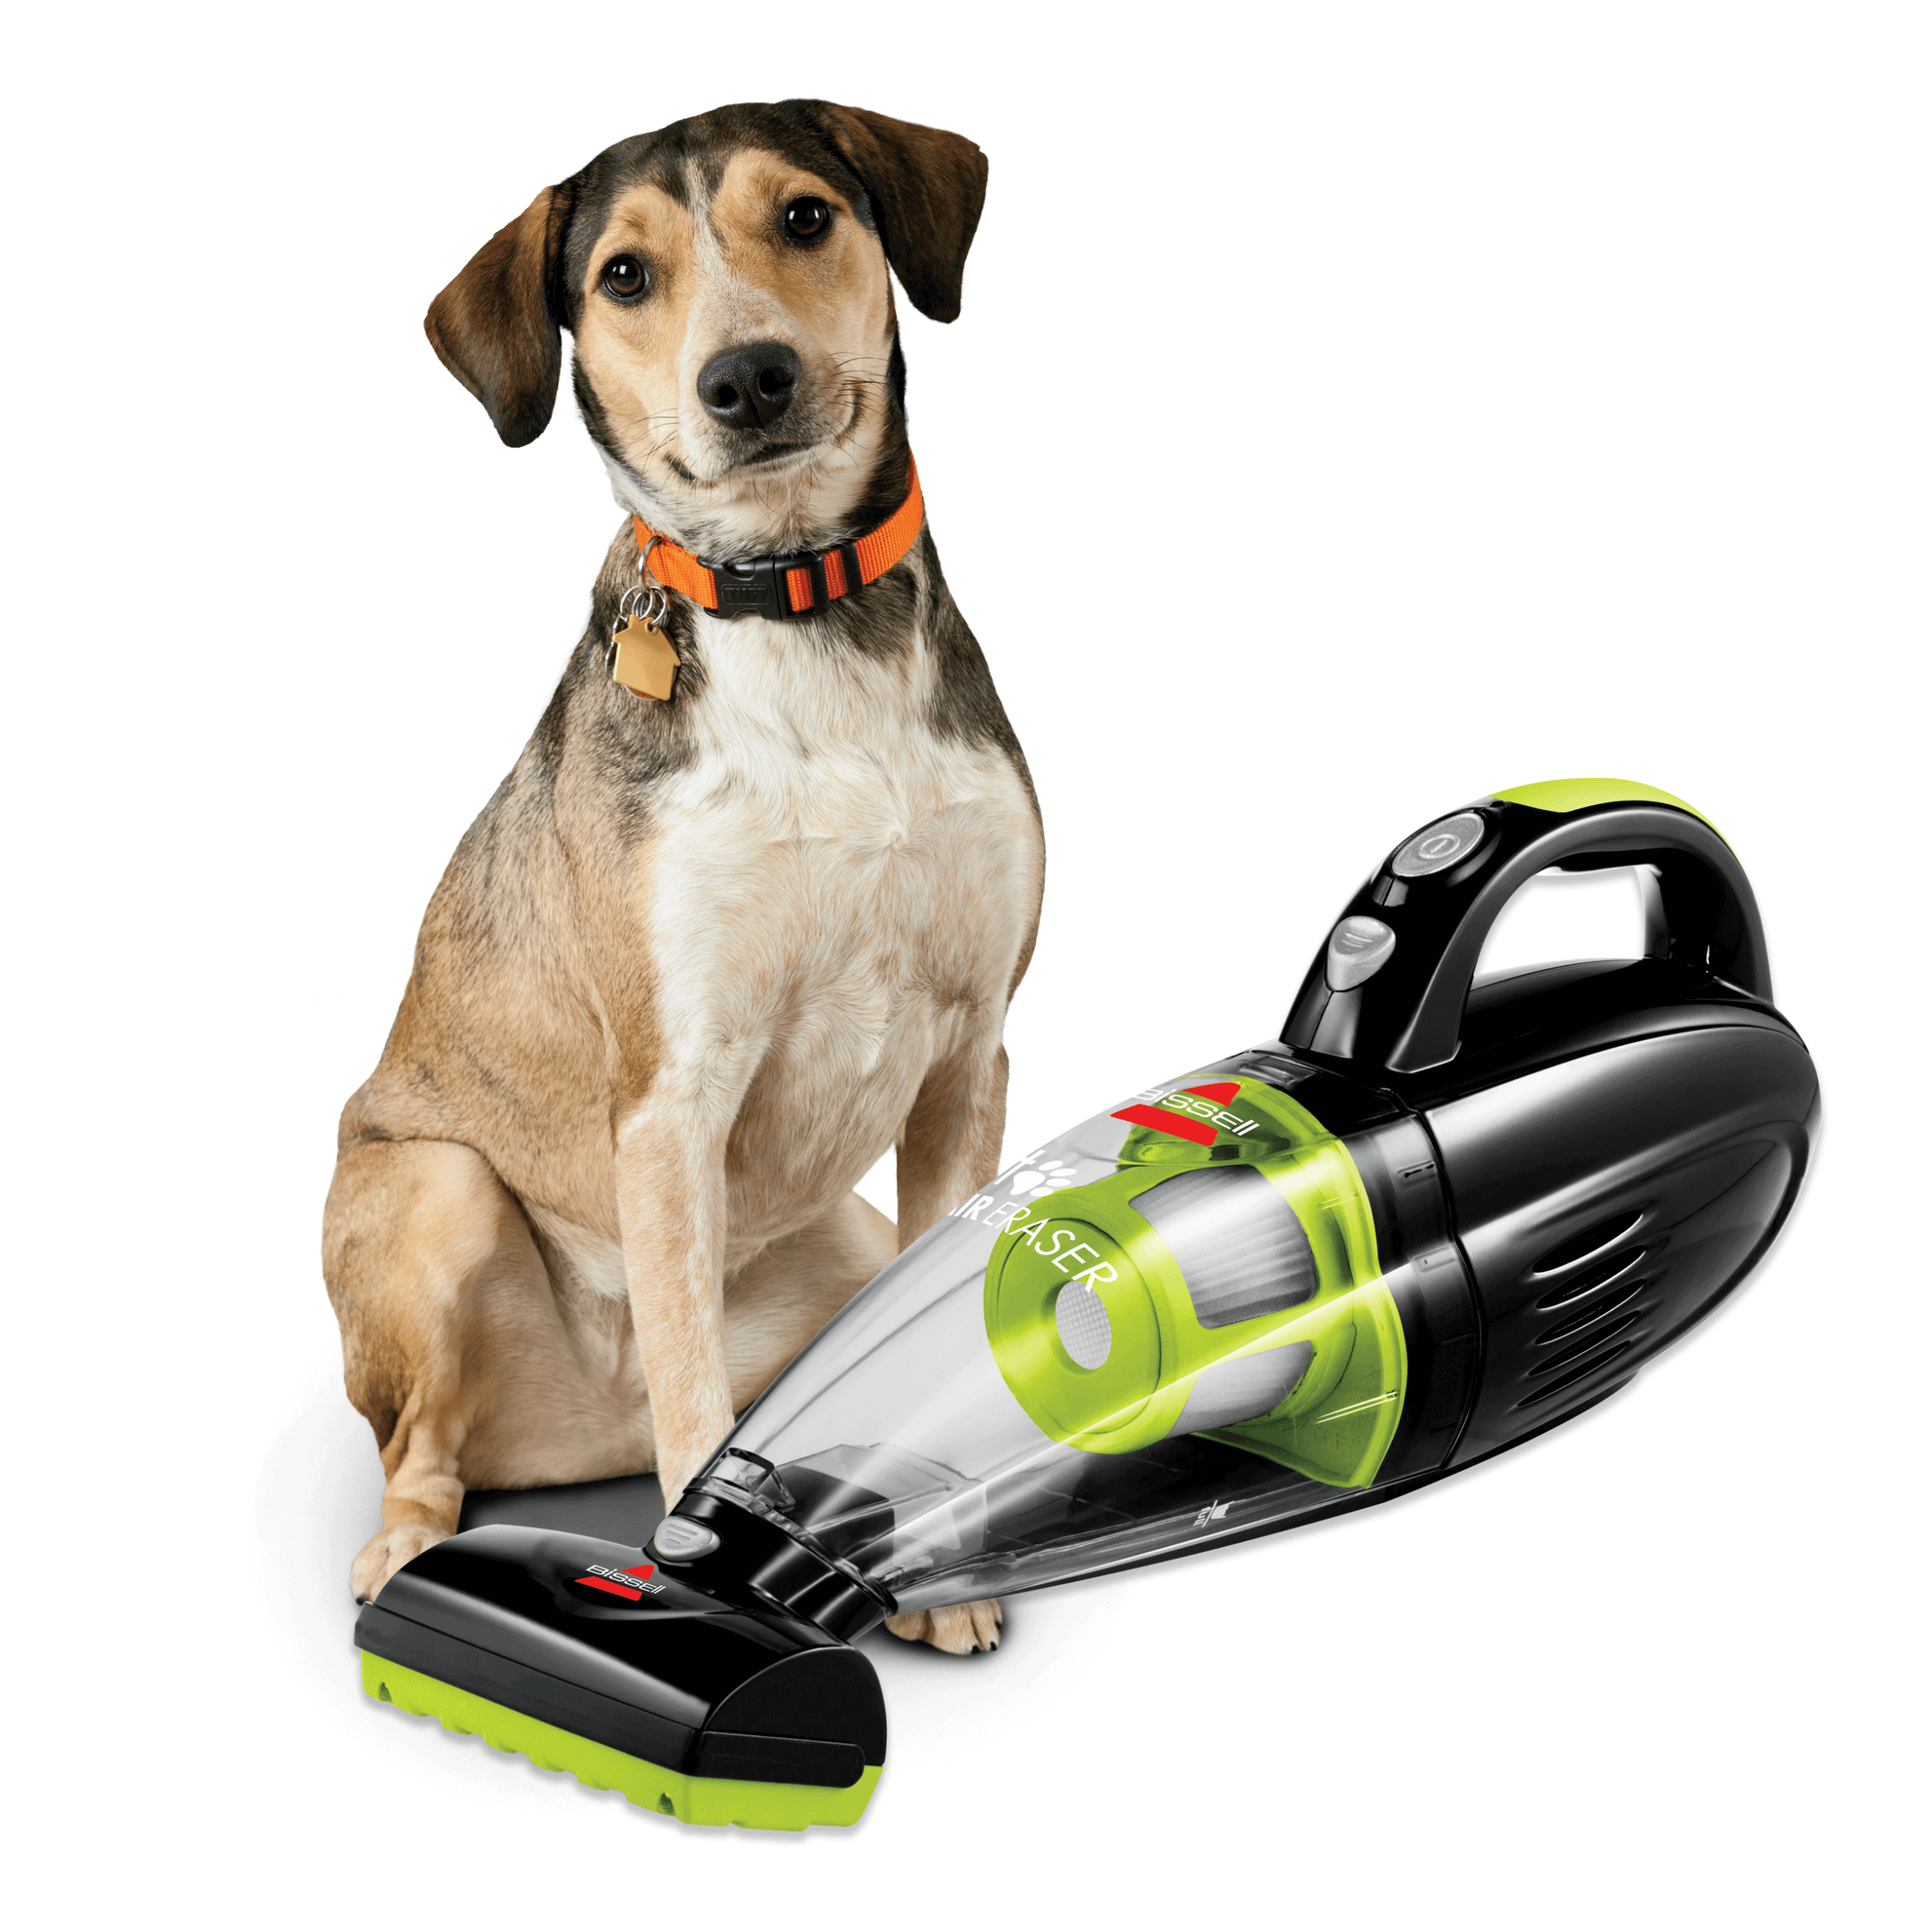 The Best Handheld Vacuum for Pet Hair Is on Sale for Under $100